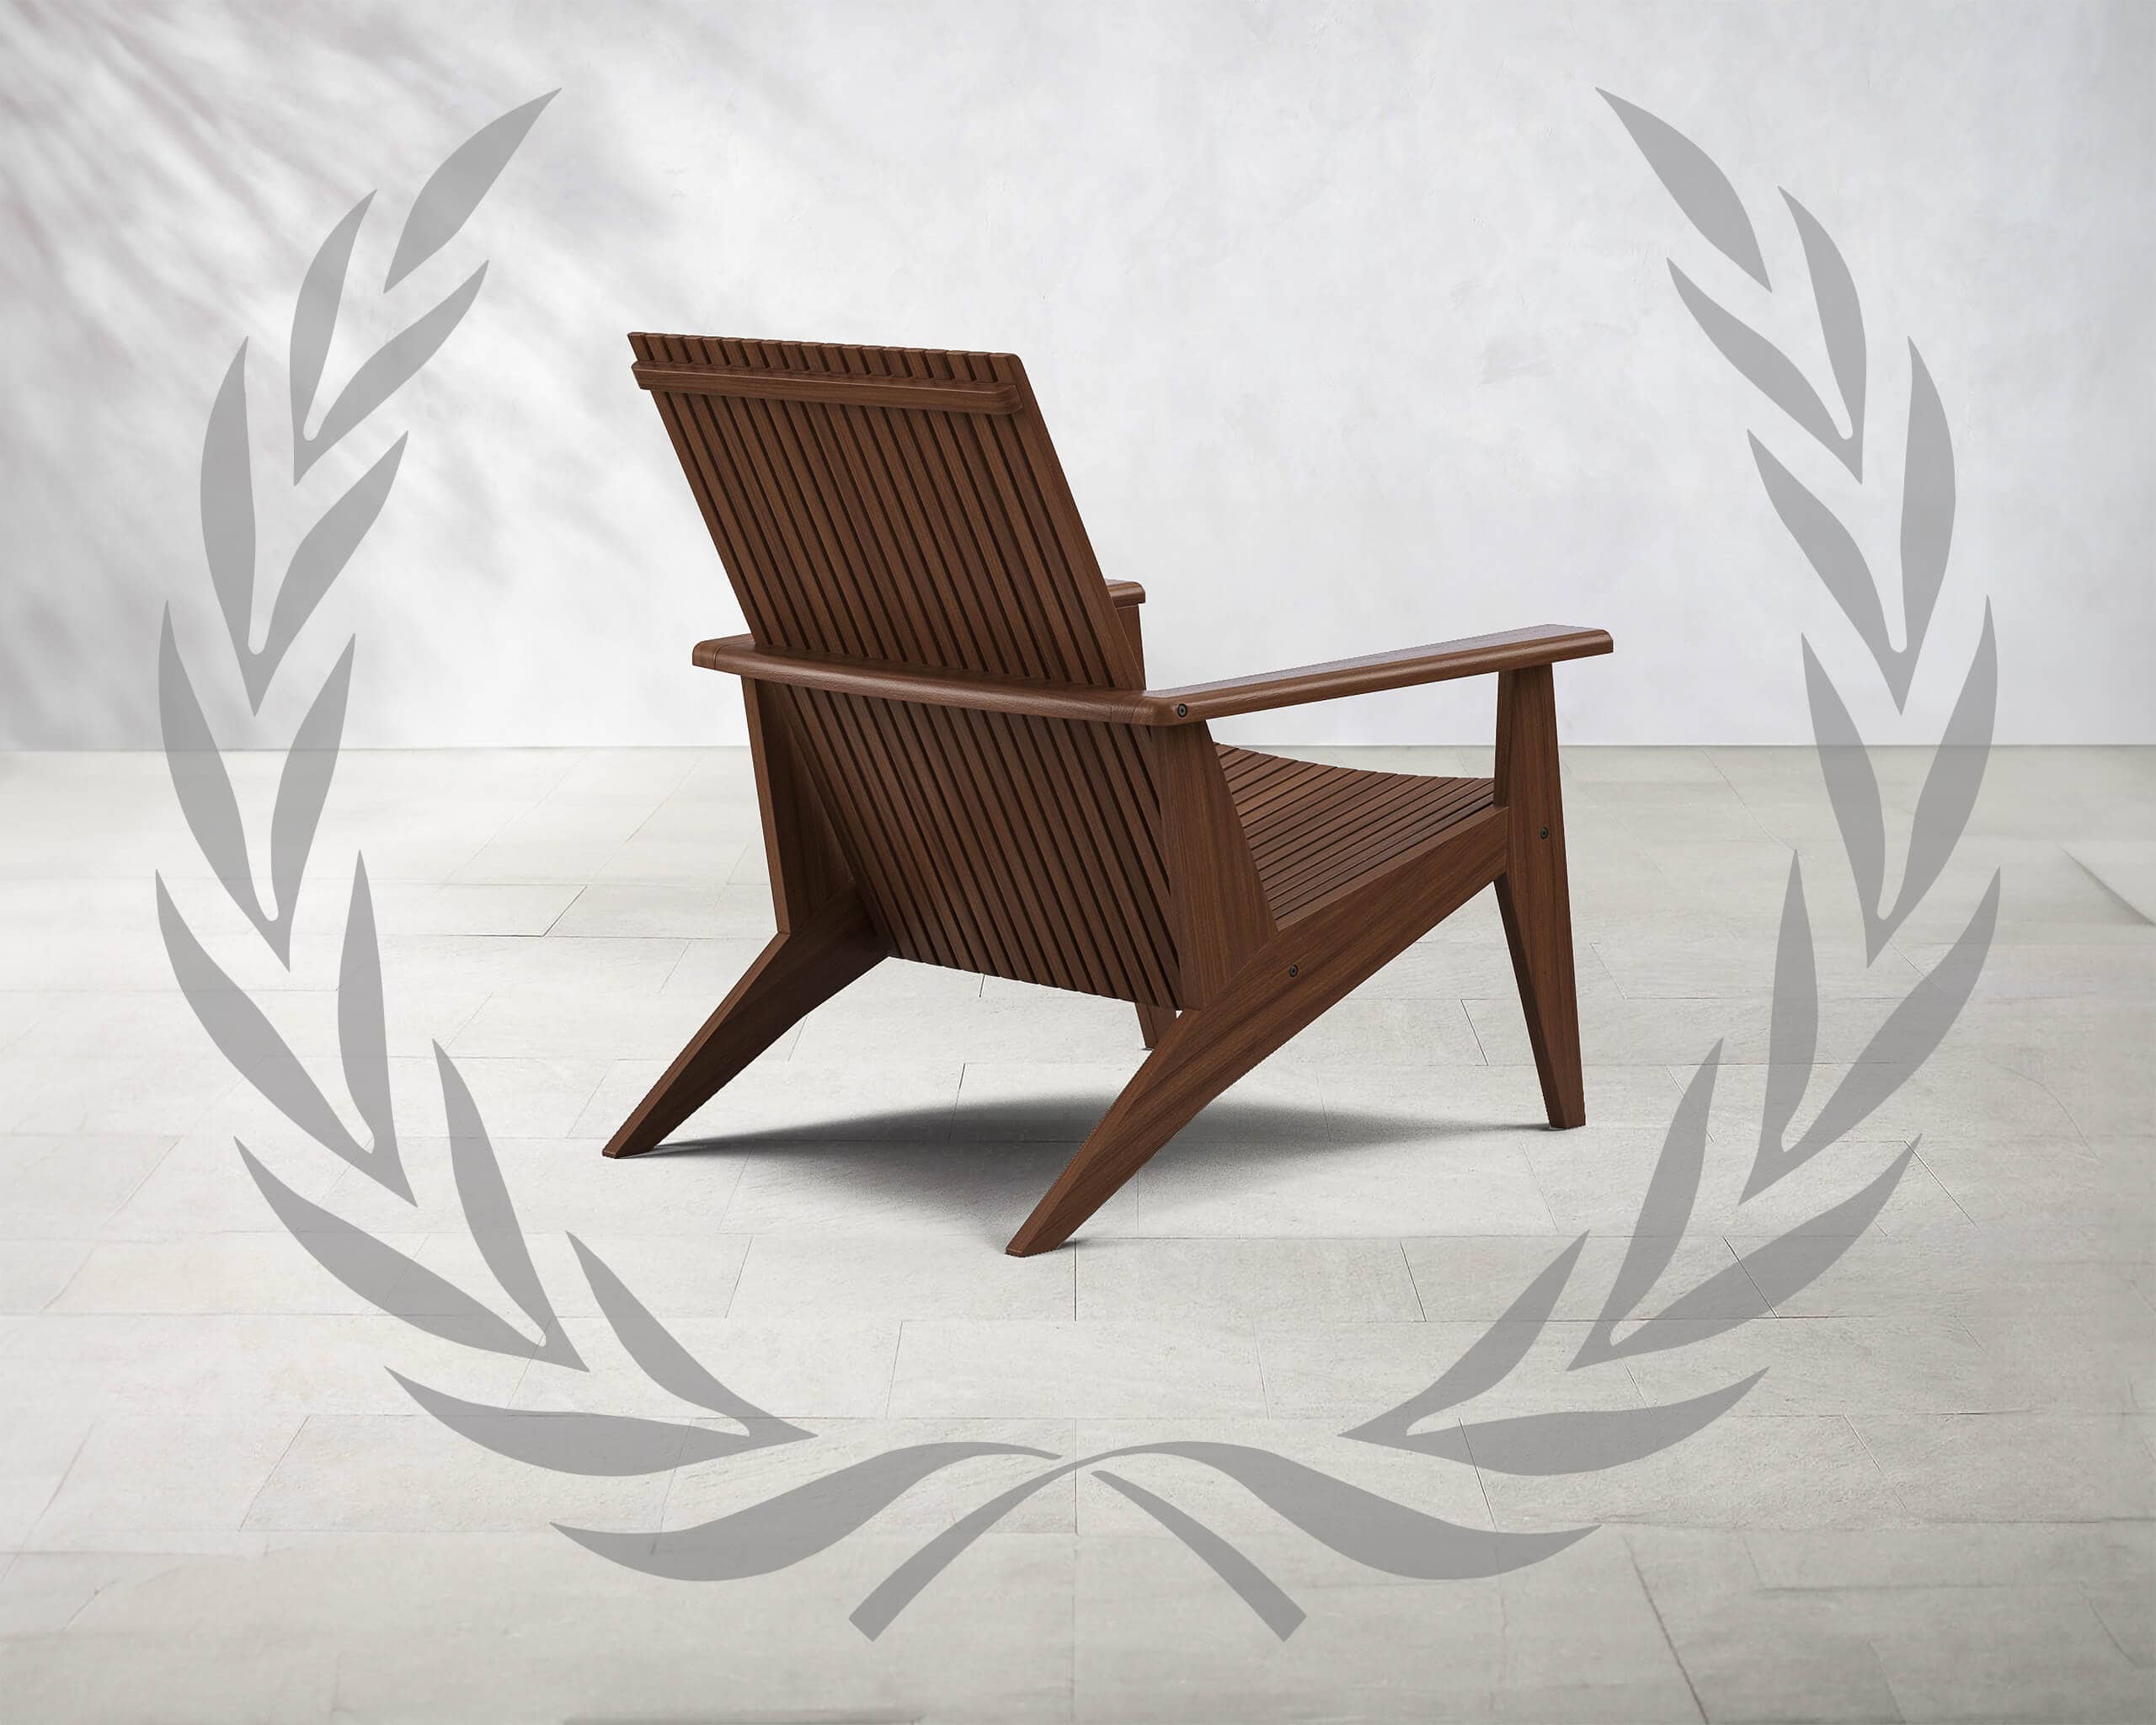 Excellence Reclines Here: Trellis Modern Lounge Chair Wins 2023 ICFA Design Excellence Category Award